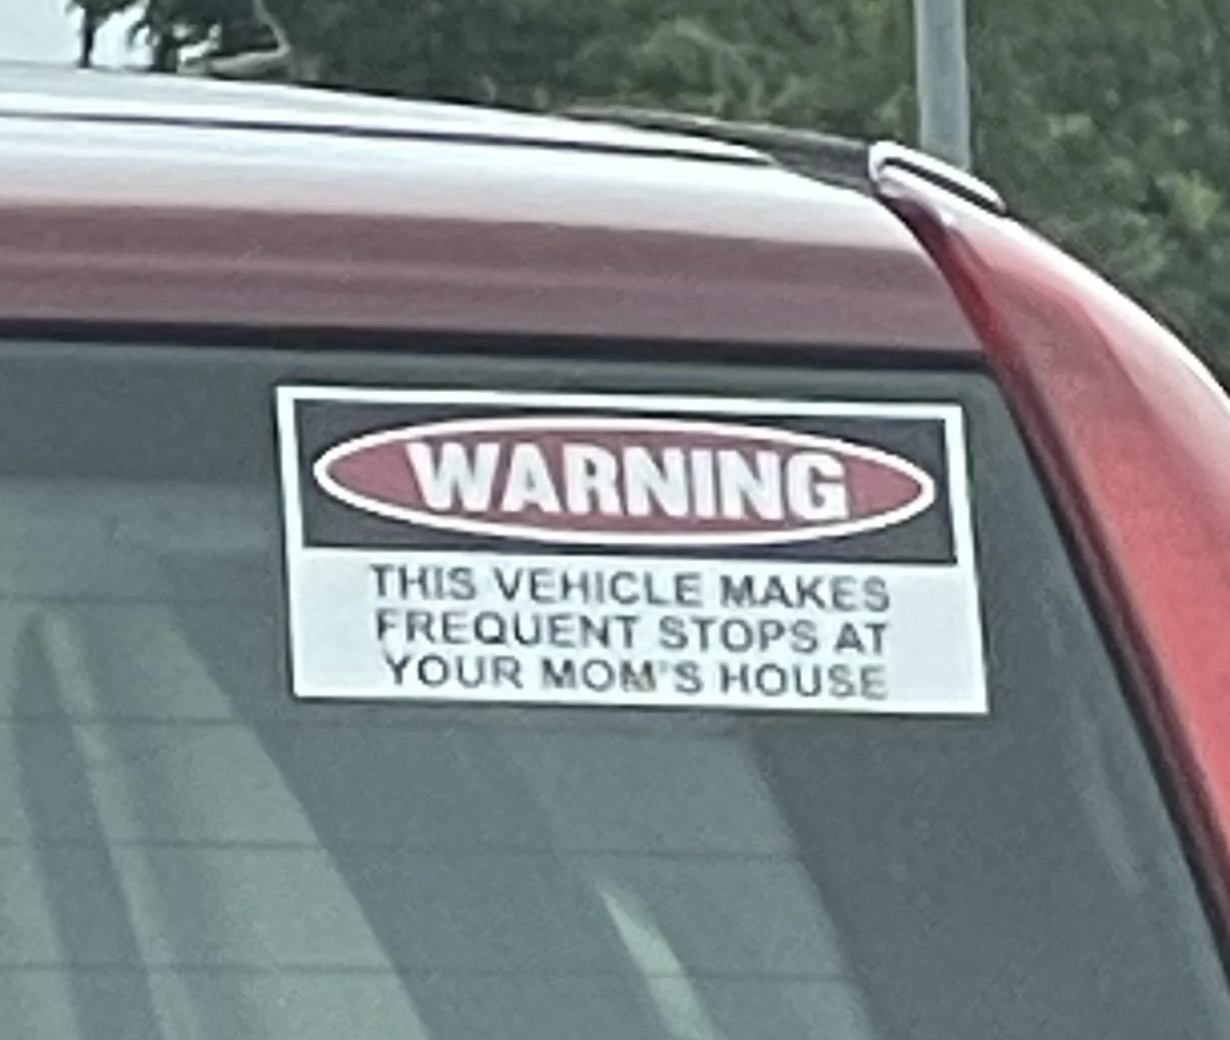 mercury topaz - Warning This Vehicle Makes Frequent Stops At Your Mom'S House